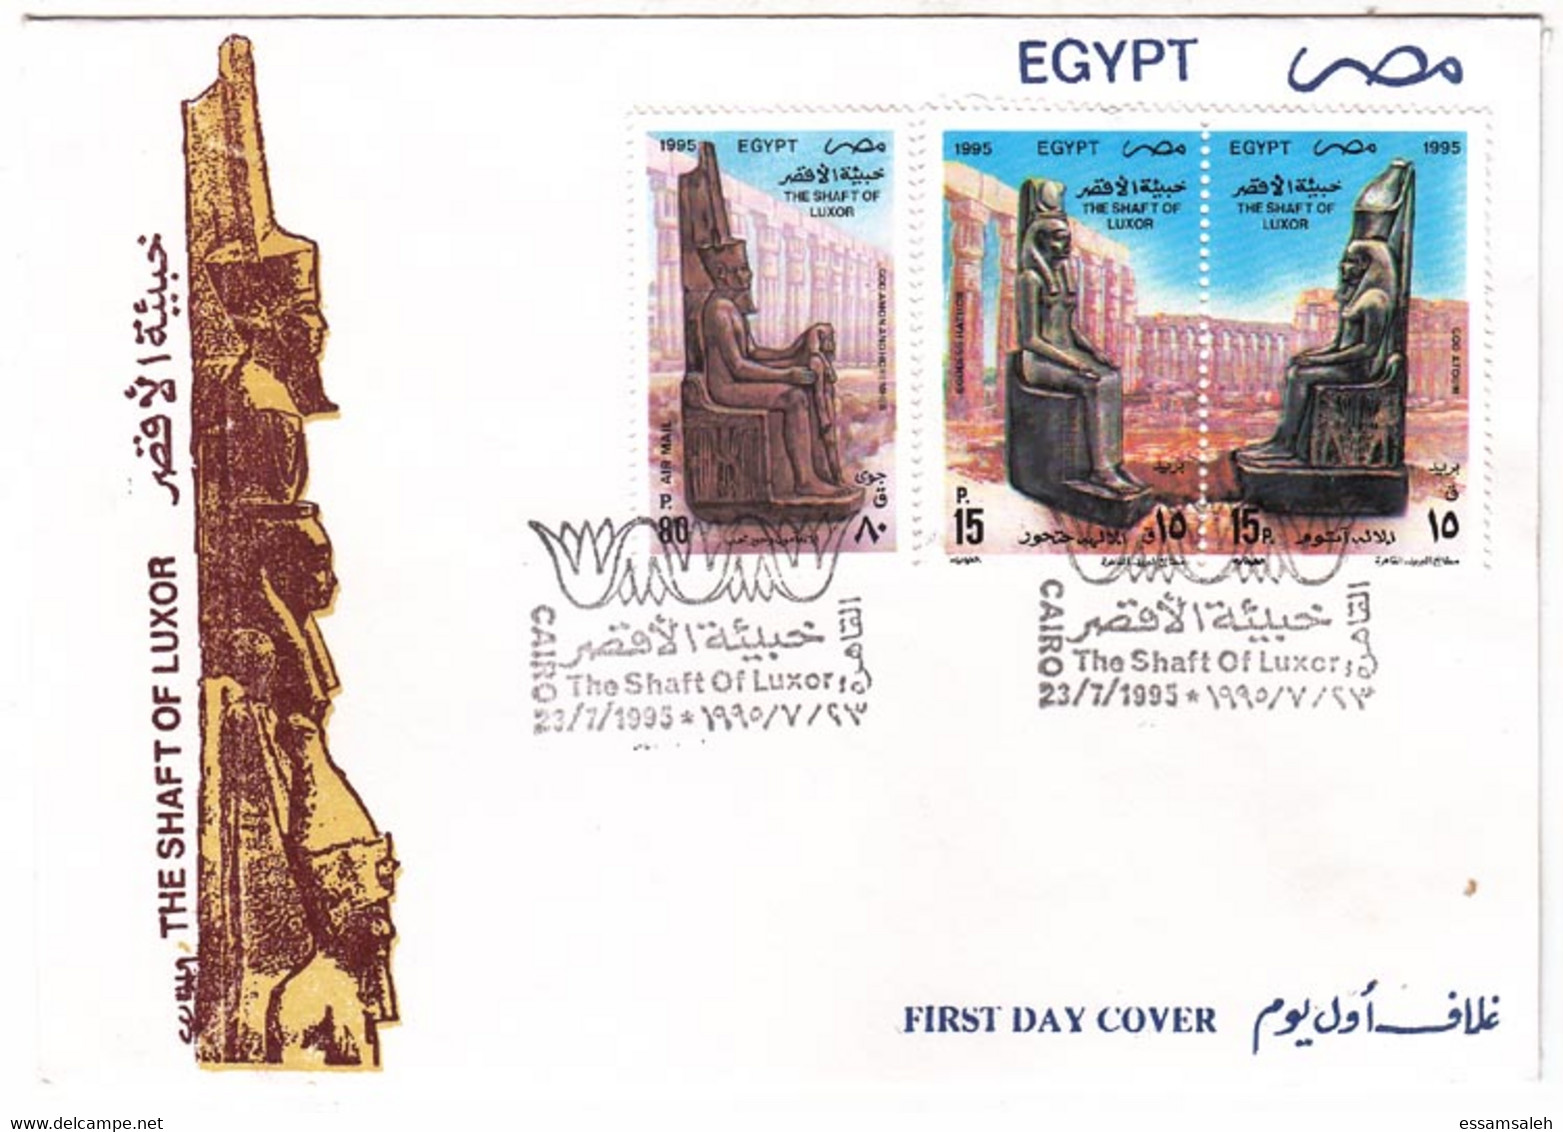 EGS30608 Egypt 1995 Illustrated FDC The Shaft Of Luxor - Statues Of The Gods Hathor, Atum, Amun, And Horemheb - Covers & Documents